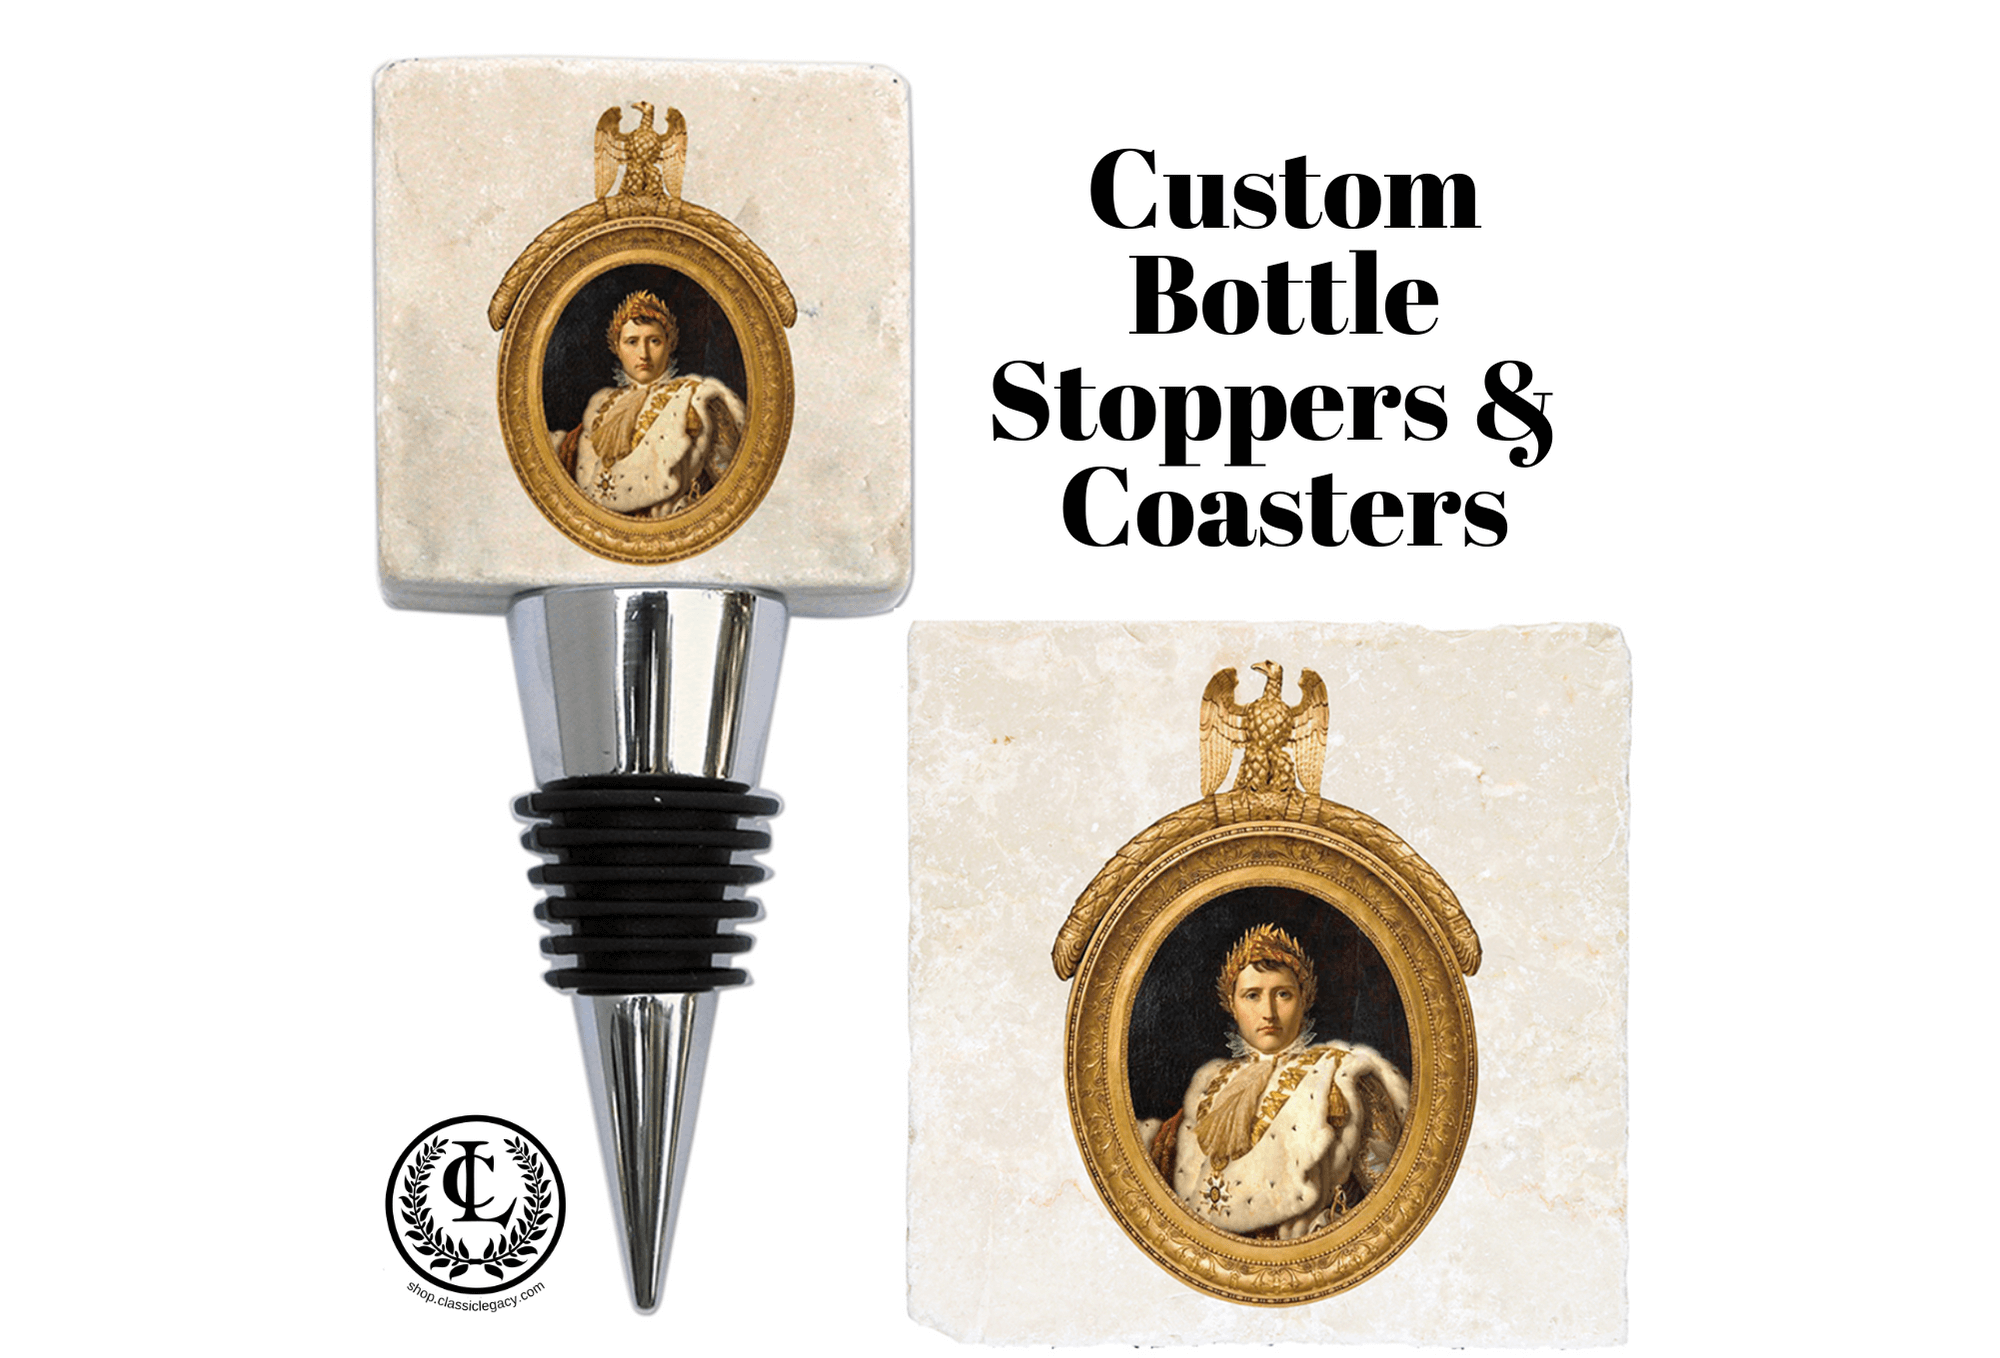 Custom Bottle stoppers for museums include the Napoleon stopper and marble coaster created from the Nelson Atkins Museum in Kansas City.